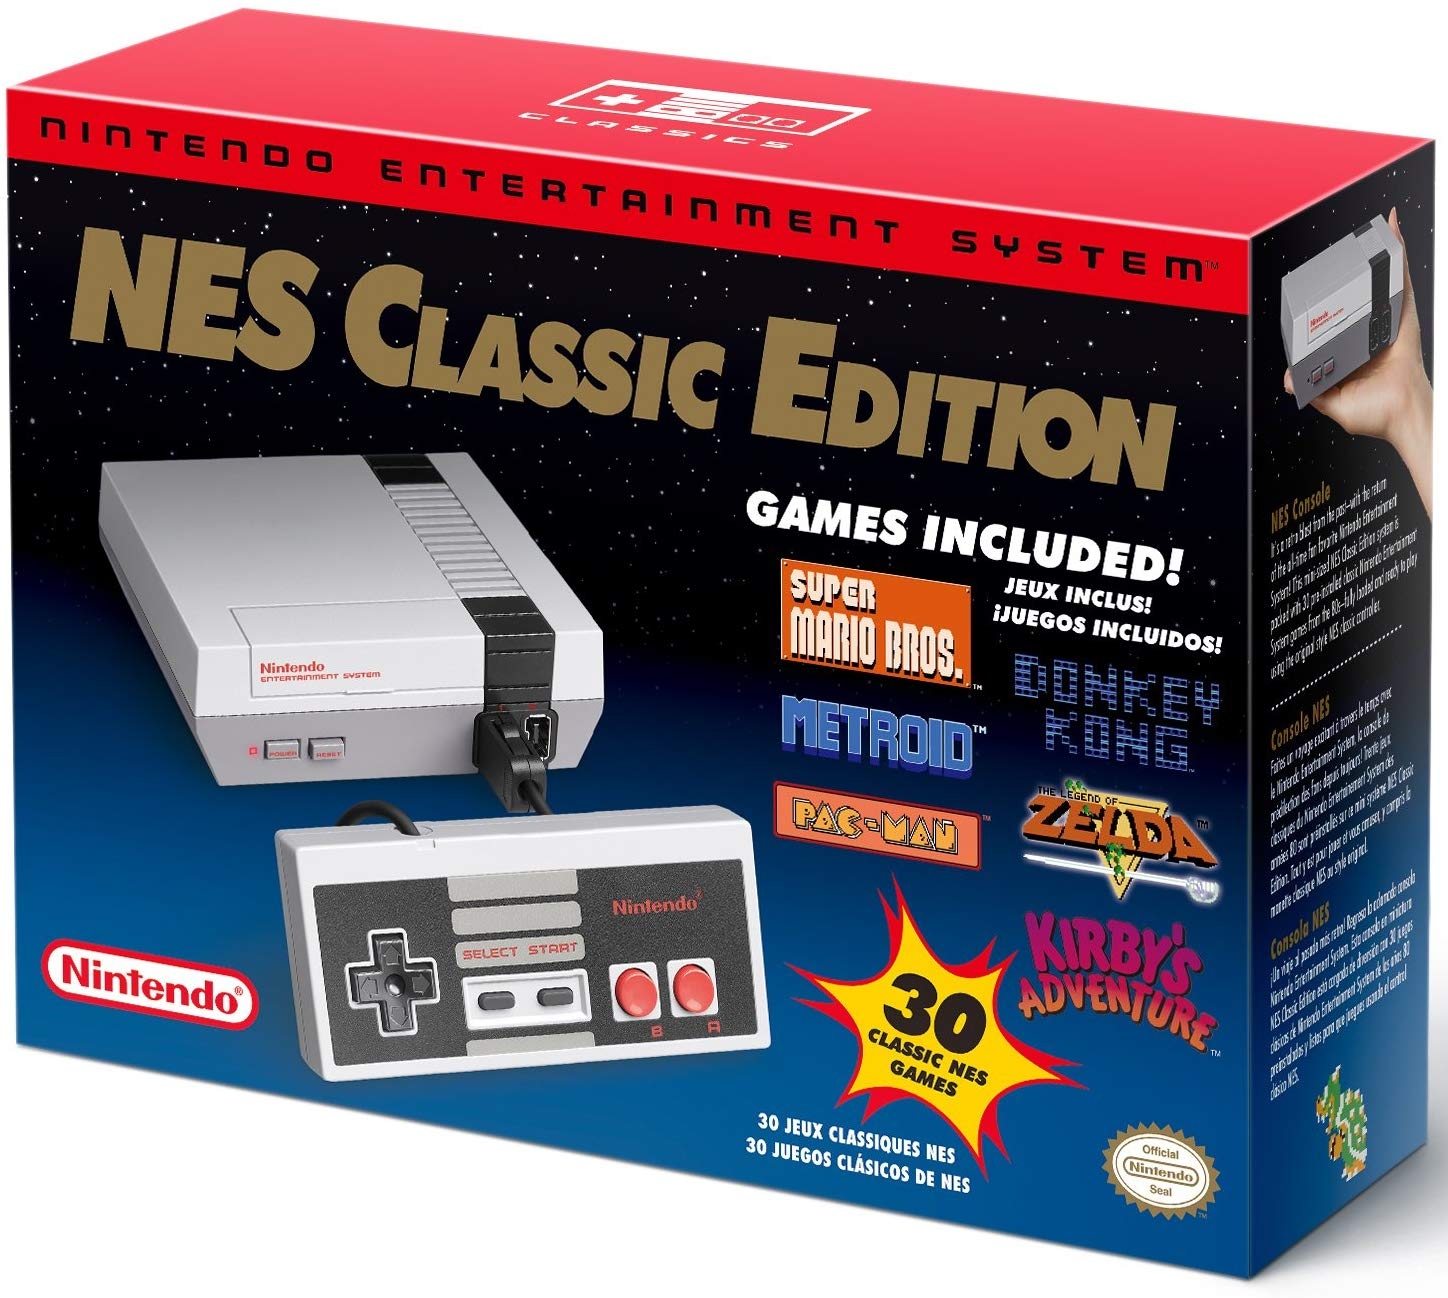 NES Classic Edition - Buy from Amazon